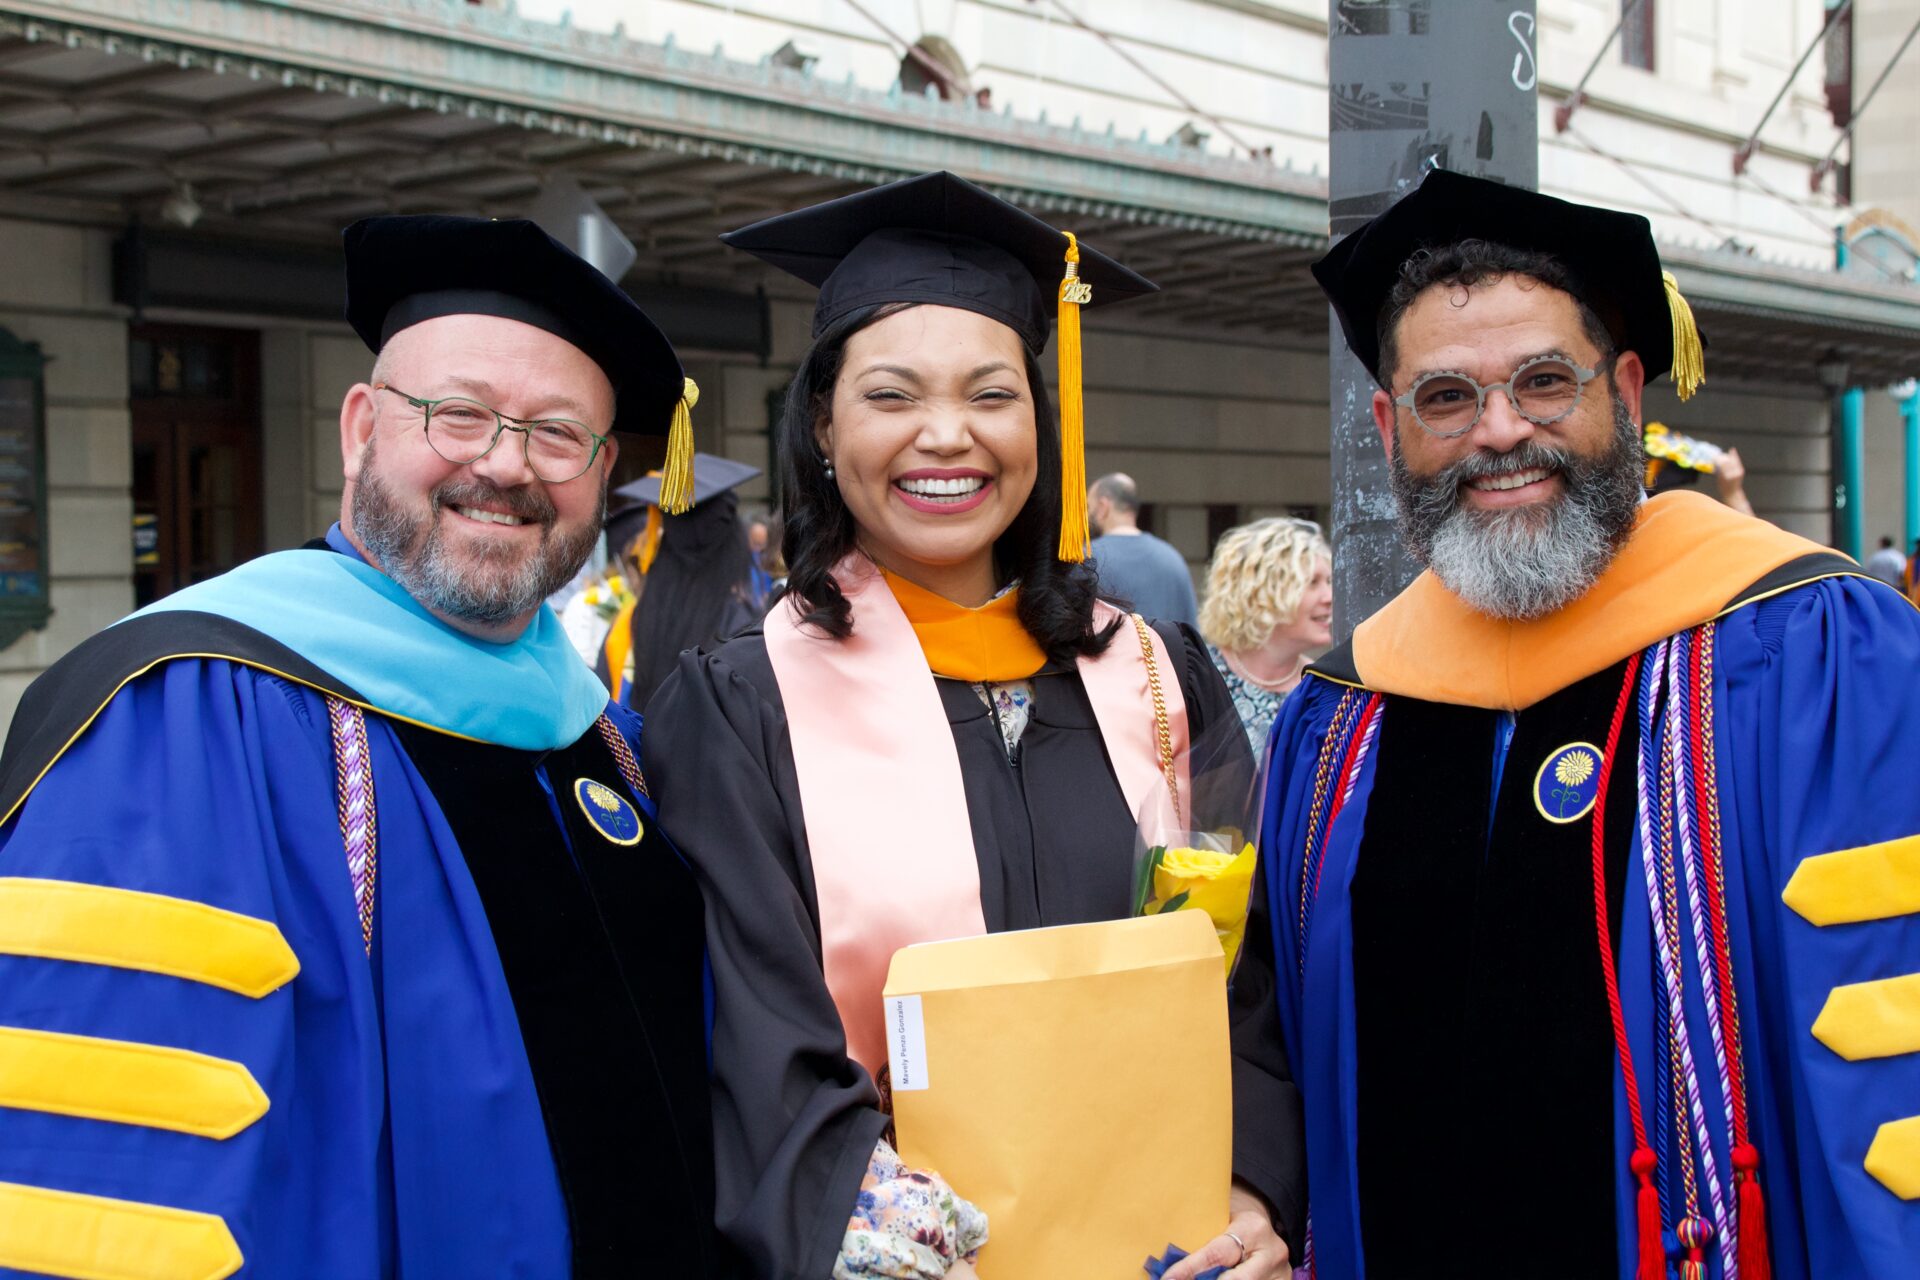 Students and professors celebrate outside the Eastman School of Music in graduation regalia.